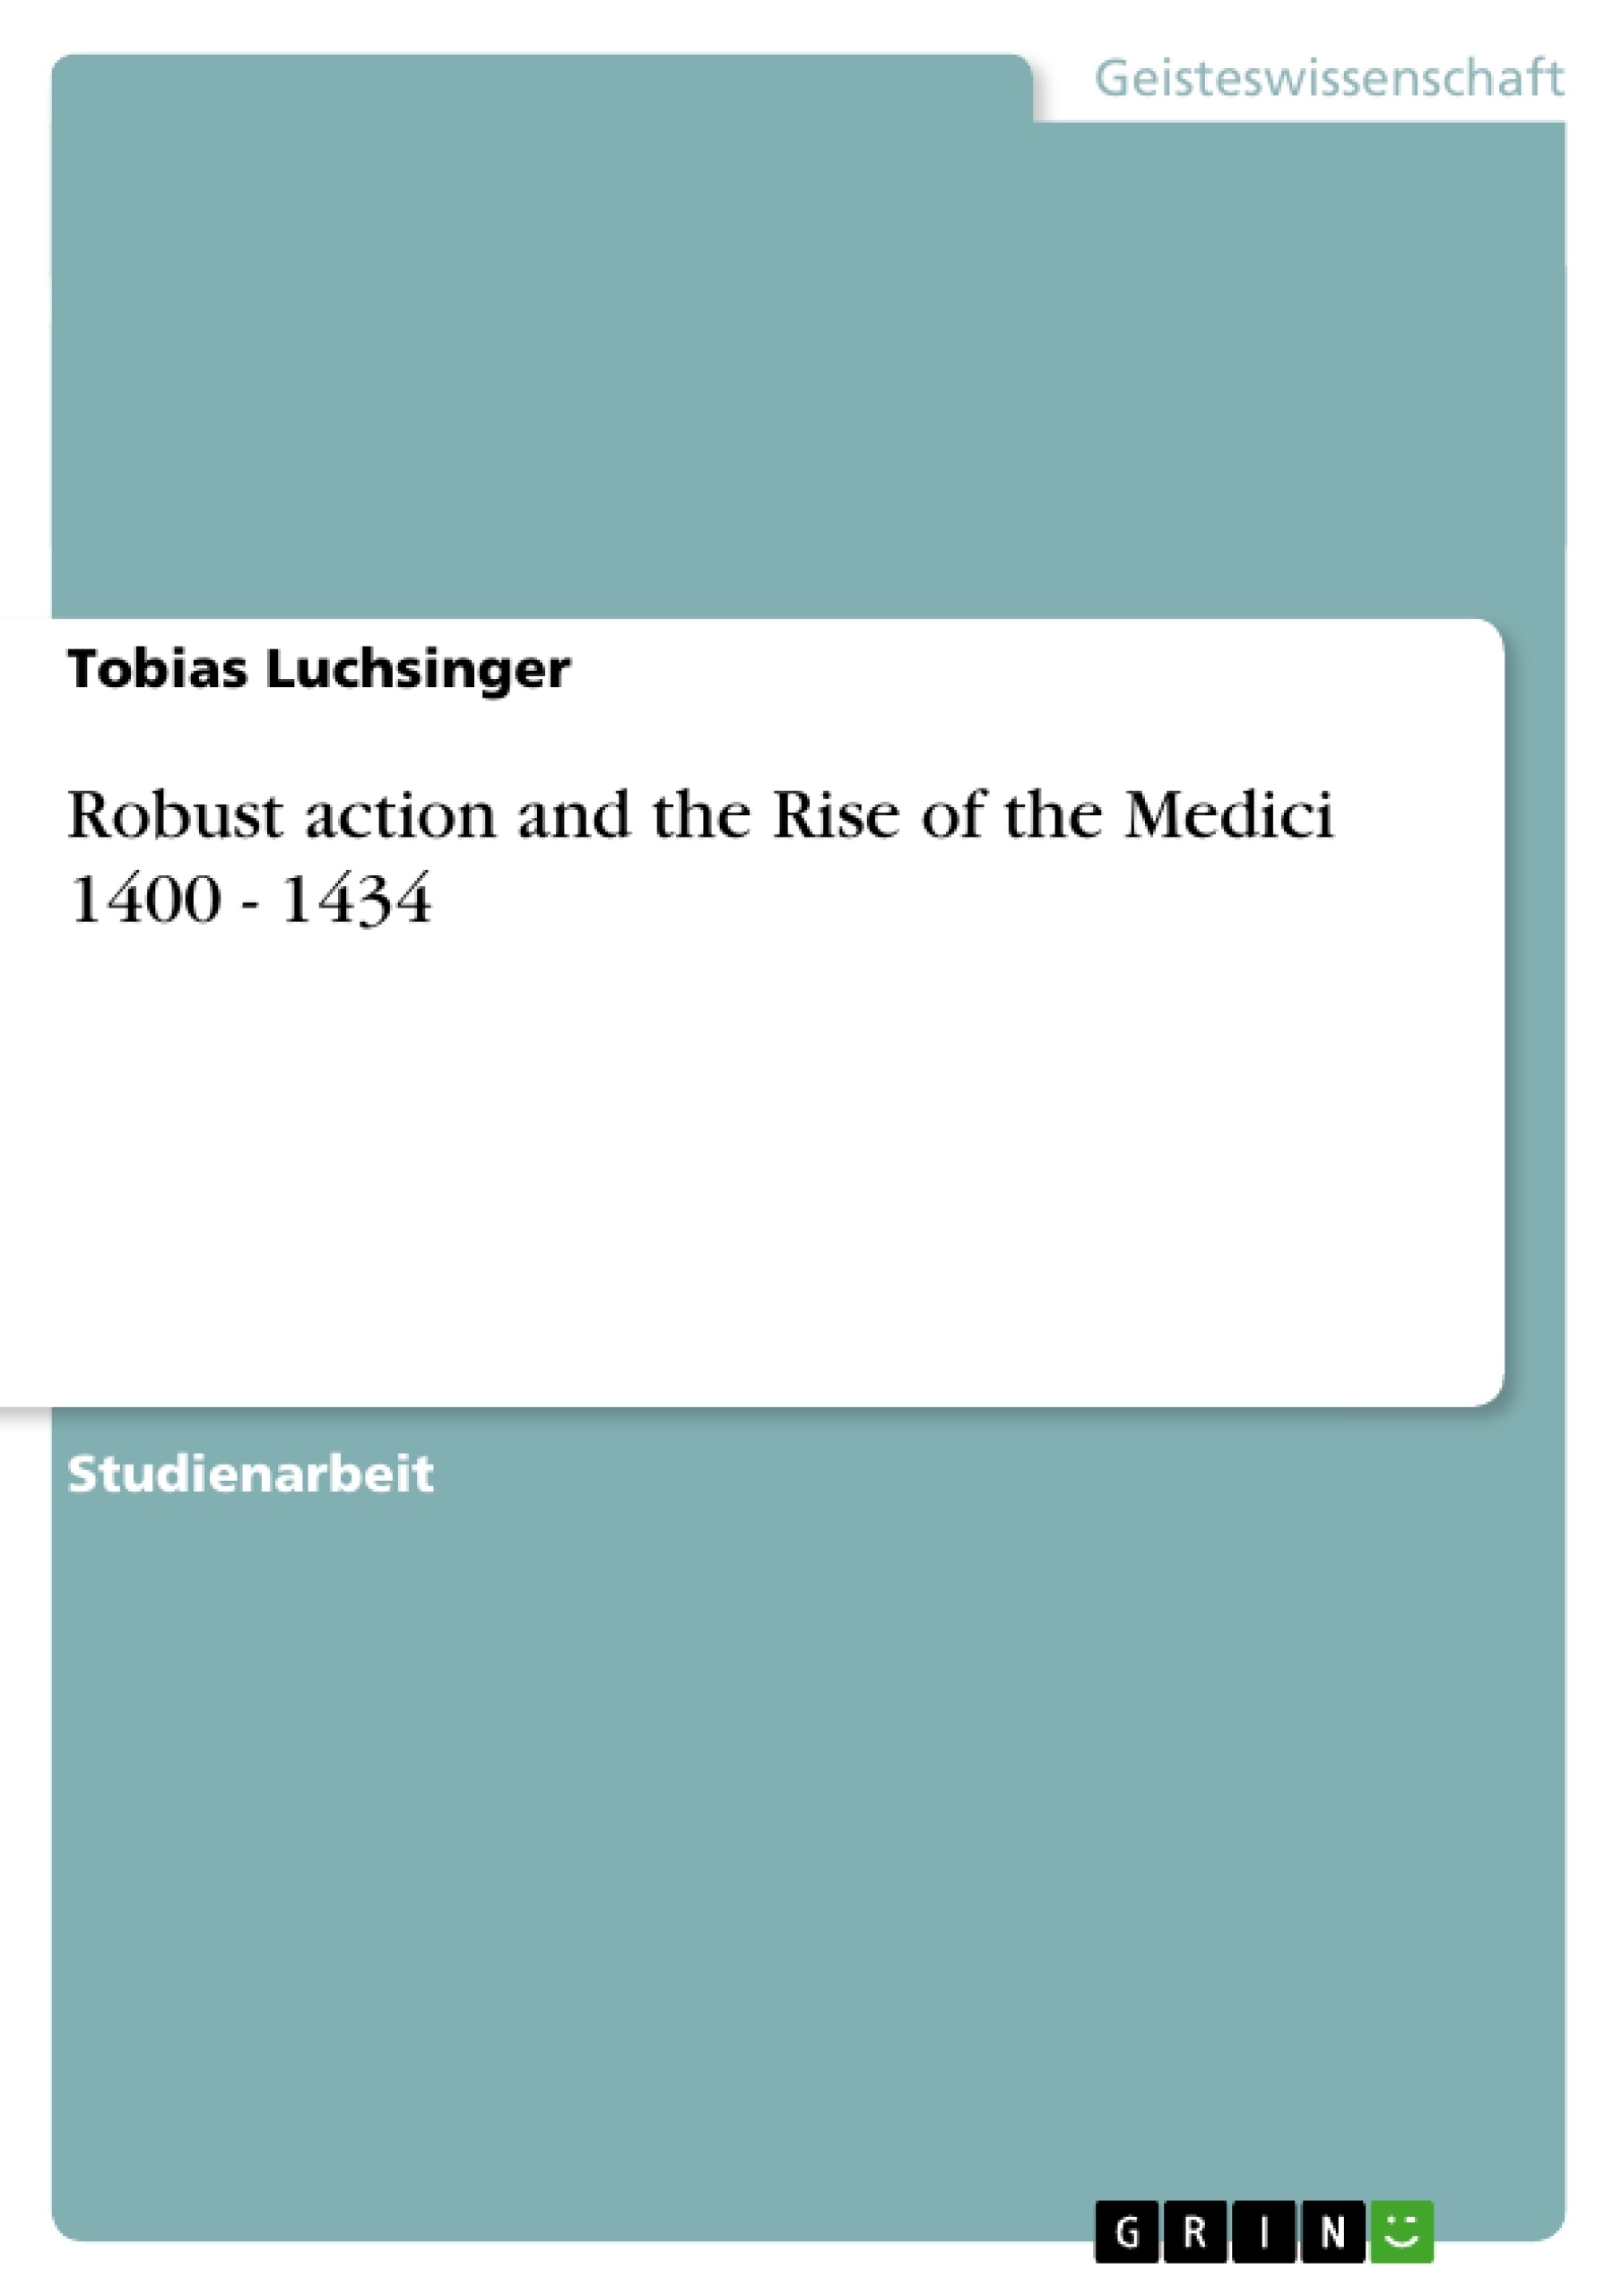 Title: Robust action and the Rise of the Medici 1400 - 1434